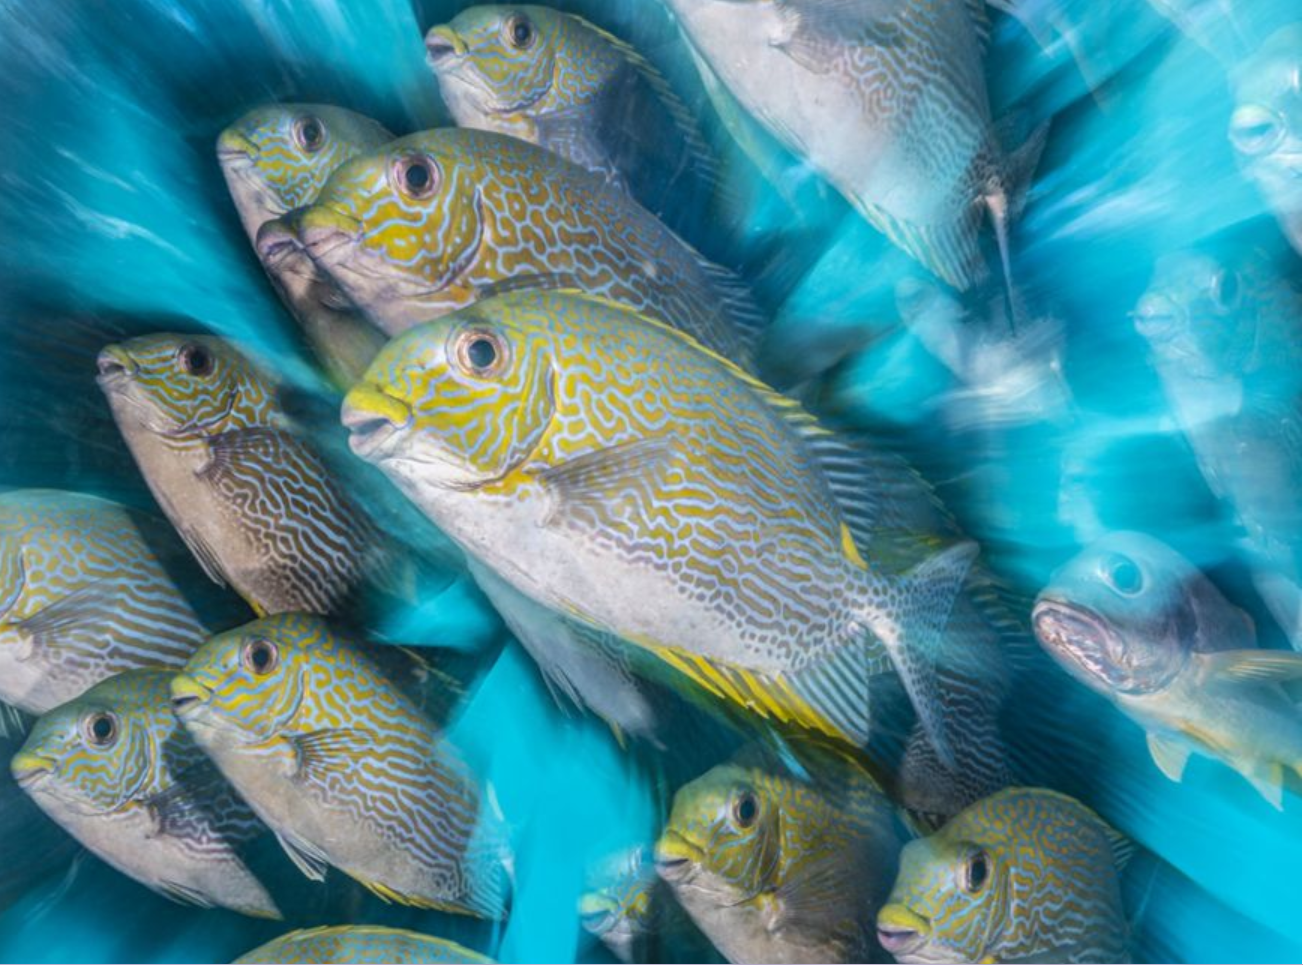 Nick More, from Devon, won British Underwater Photographer of the Year with Rabbitfish Zoom Blur shot in Indonesia.